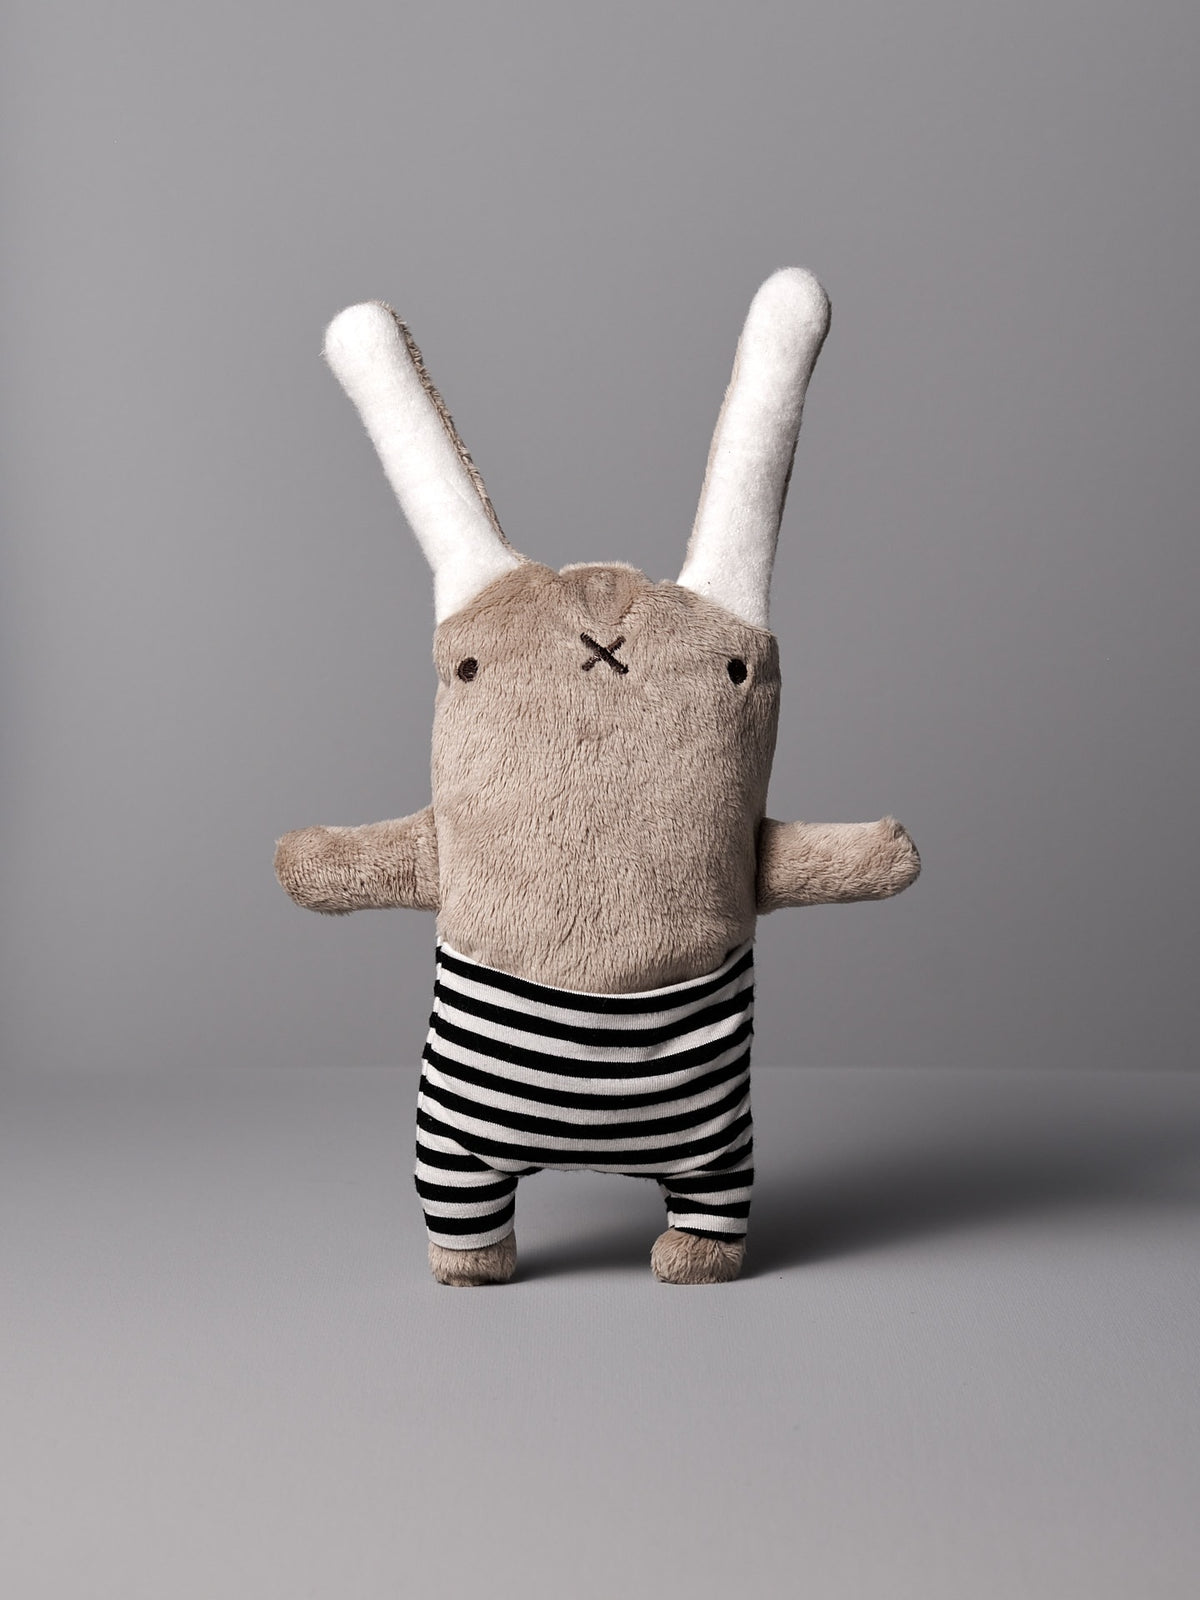 A Louise la Lapine stuffed animal with a striped shirt by Raplapla.